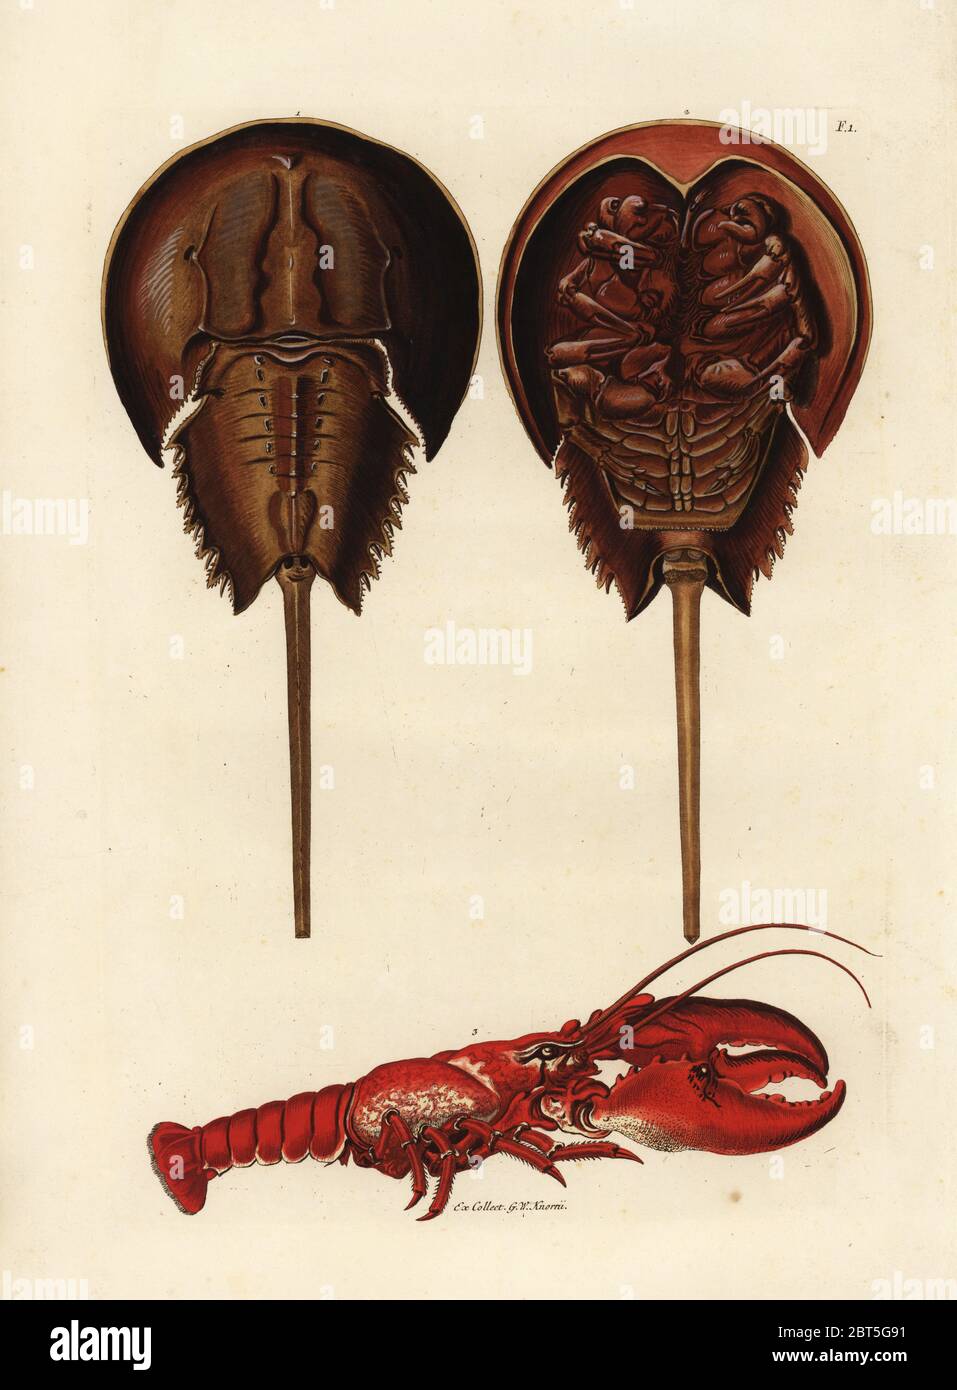 Horseshoe crab, Limulus polyphemus, and lobster, Homarus gammarus (Ecrevisse moluque, Monoculus polyphemus, and le homard, Astacus marinus). From the collection of G.W. Knorr. Handcoloured copperplate engraving by Georg Wolfgang Knorr from his Deliciae Naturae Selectae of Kabinet van Zeldzaamheden der Natuur, Blusse and Son, Nuremberg, 1771. Stock Photo